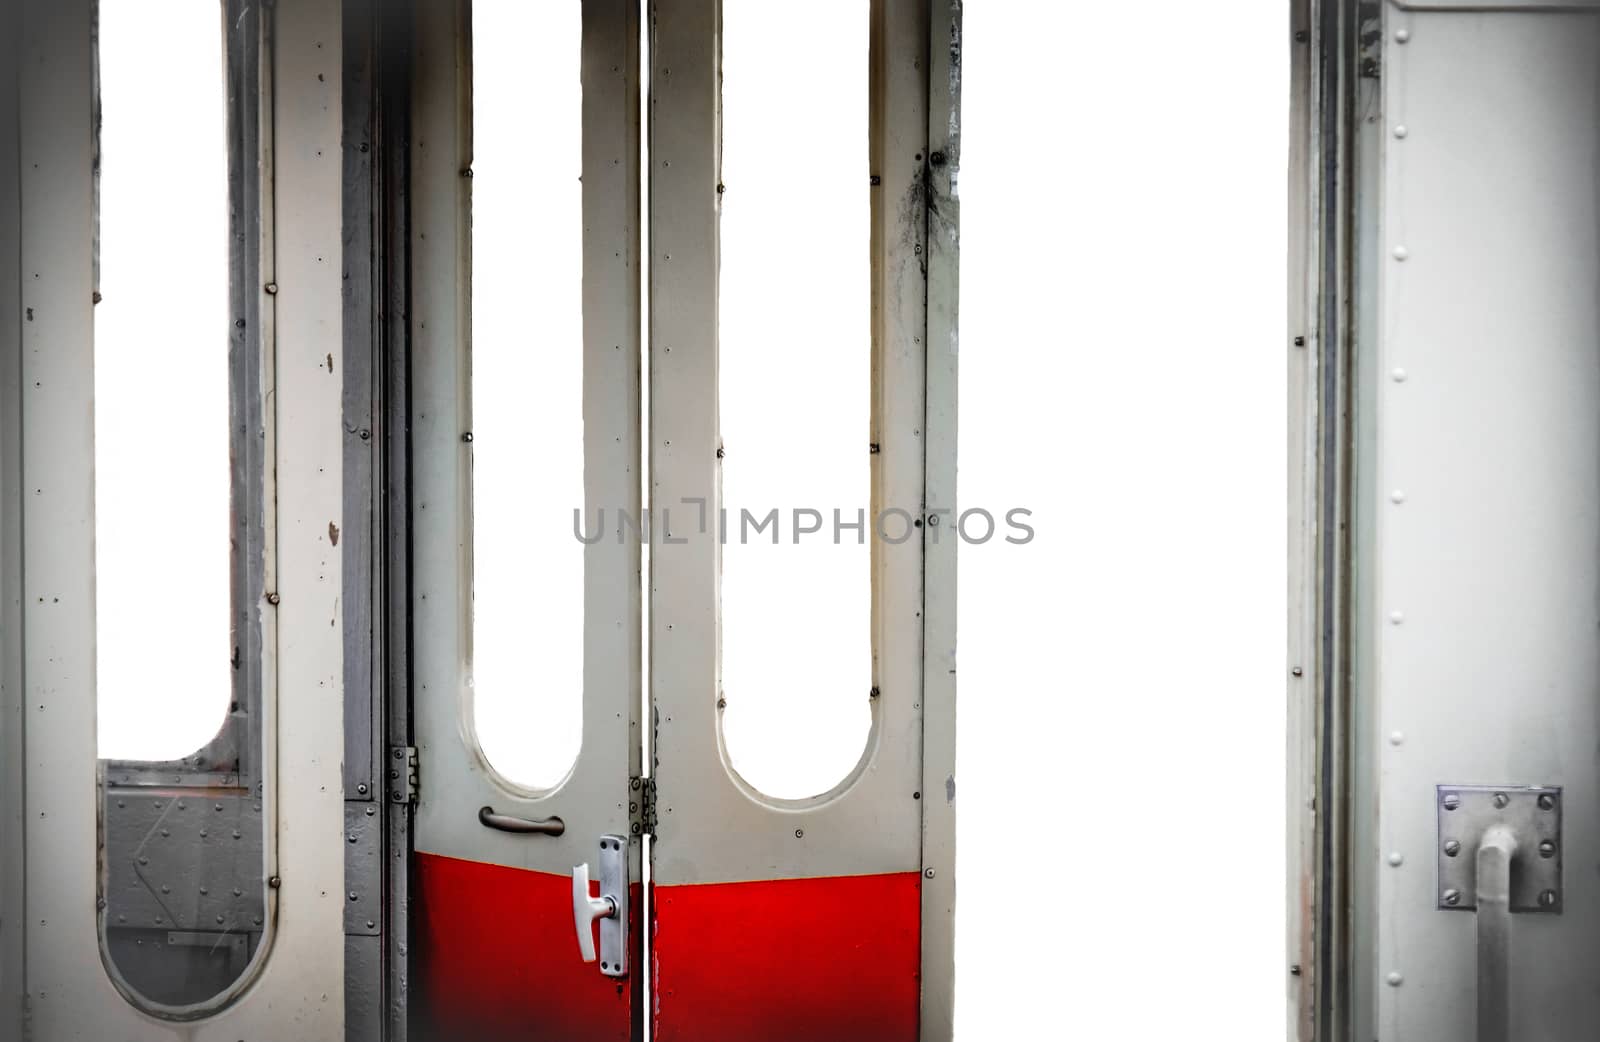 old tram open doors interior isolated white background - visit city with public transport concept